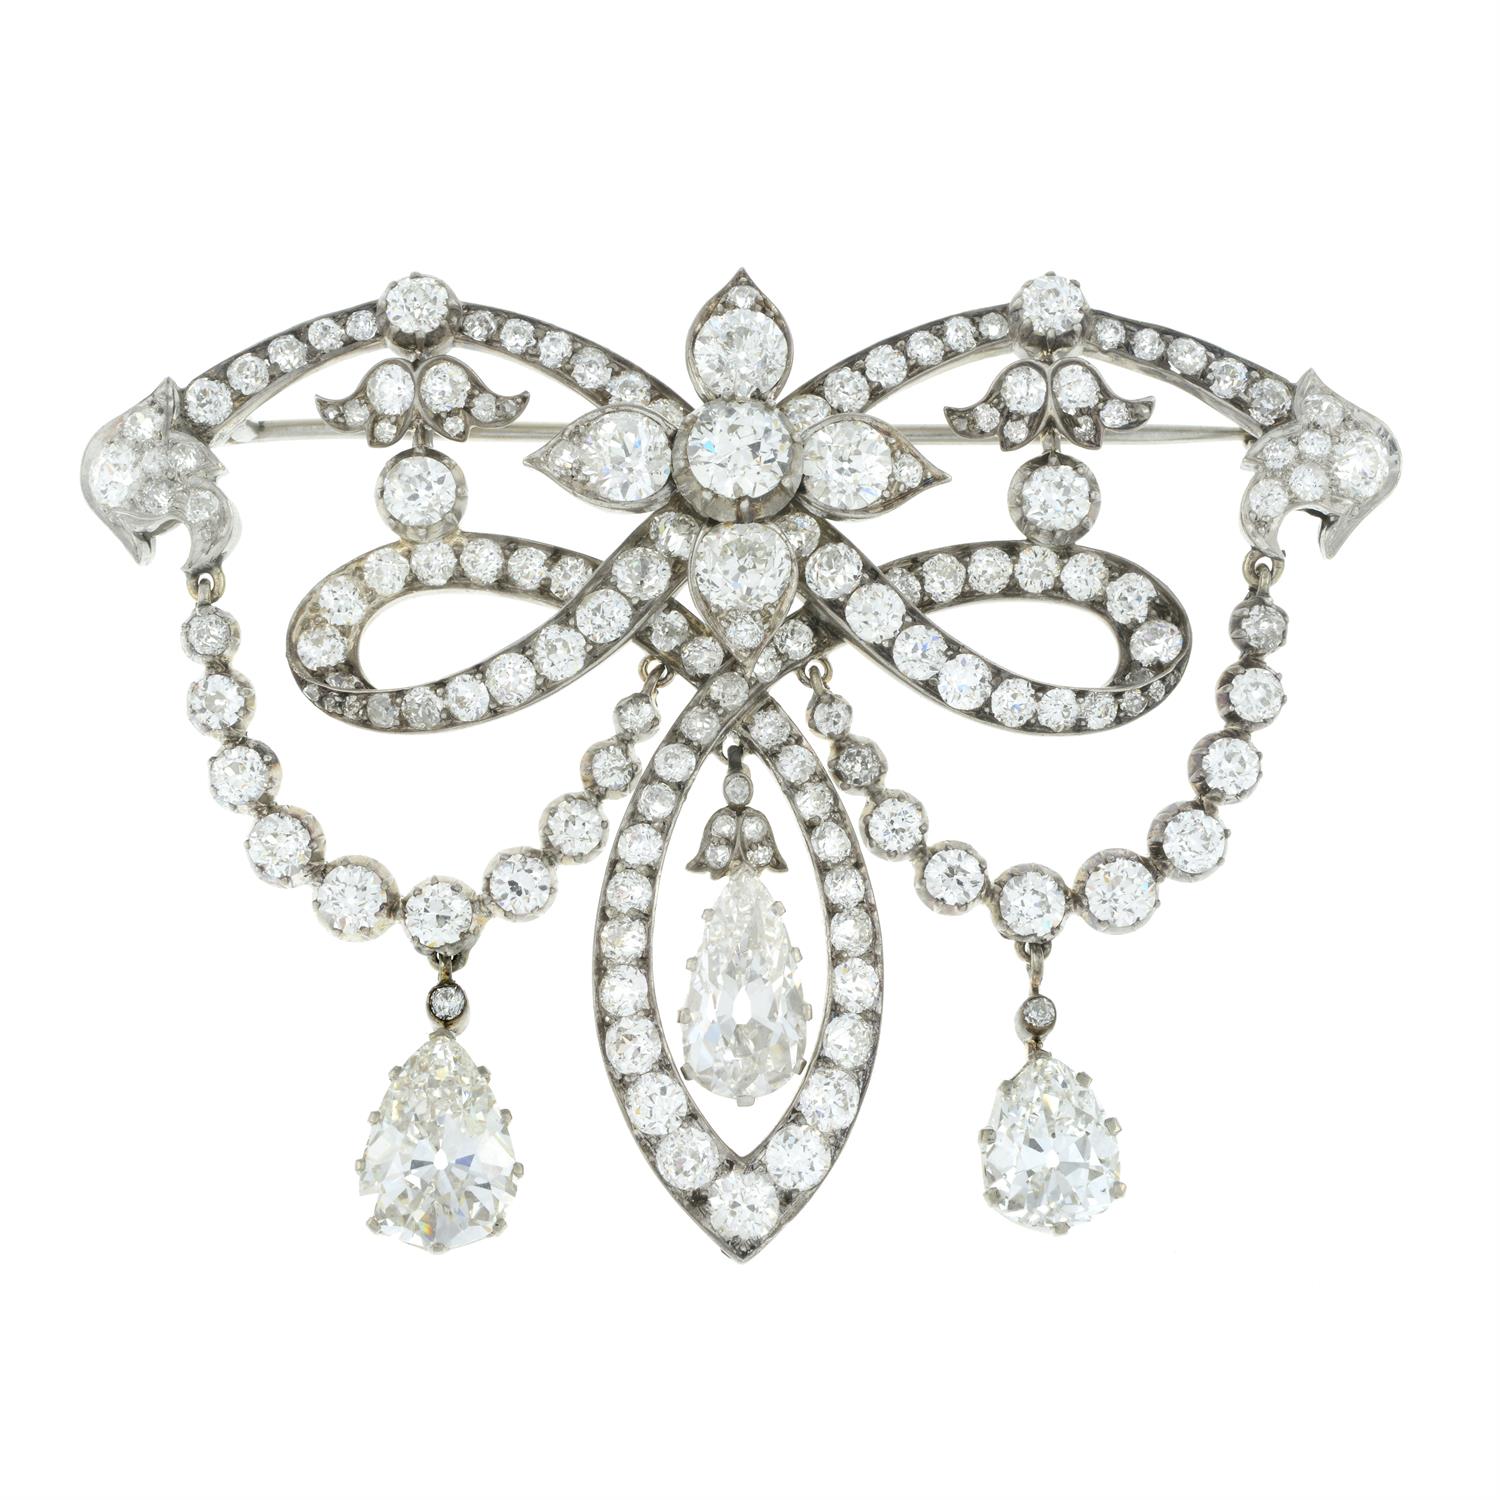 19th century silver and gold diamond brooch - Image 2 of 7